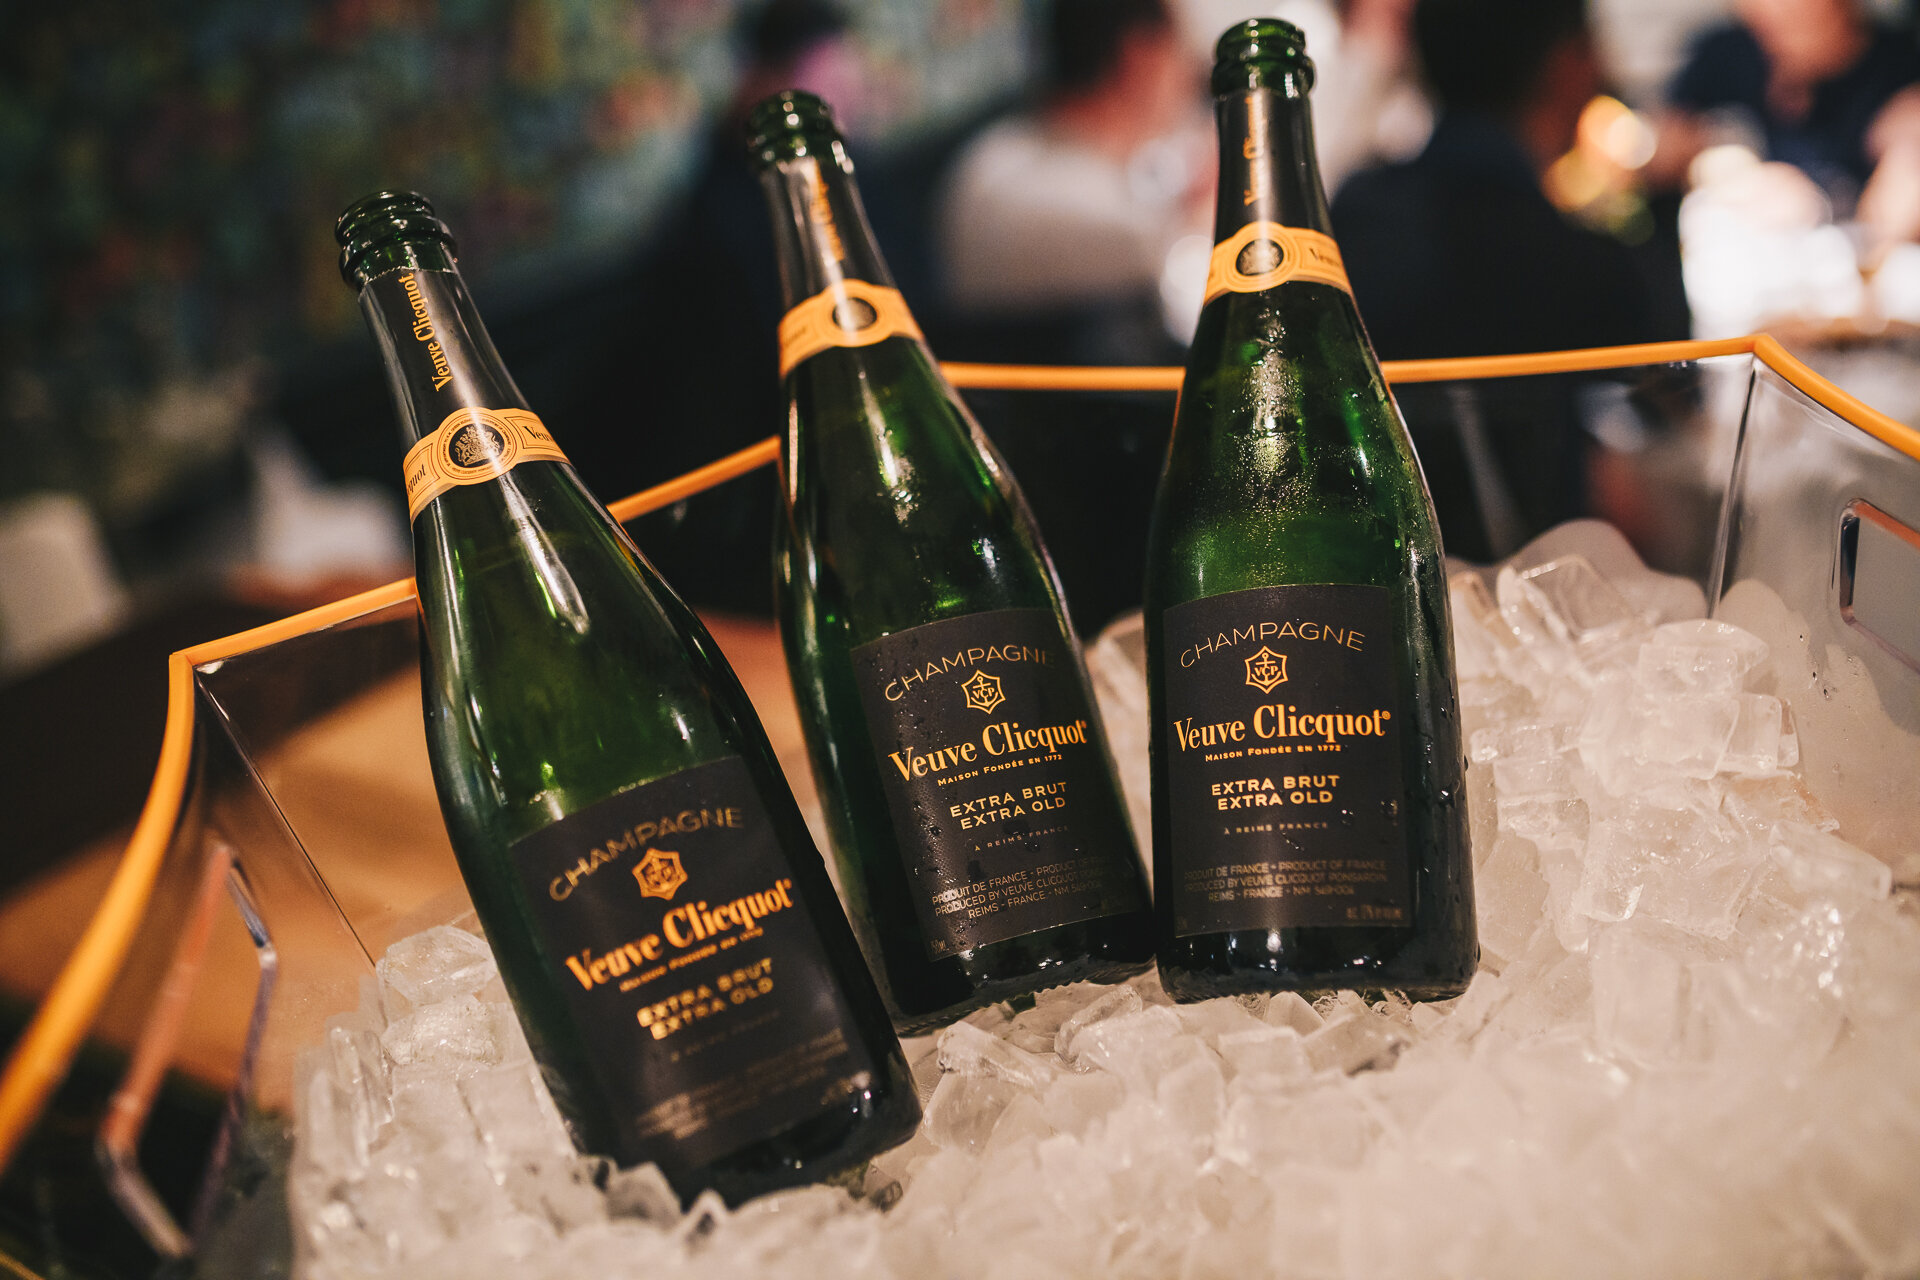 Veuve Clicquot to Host the Ultimate Champagne Party Weekend